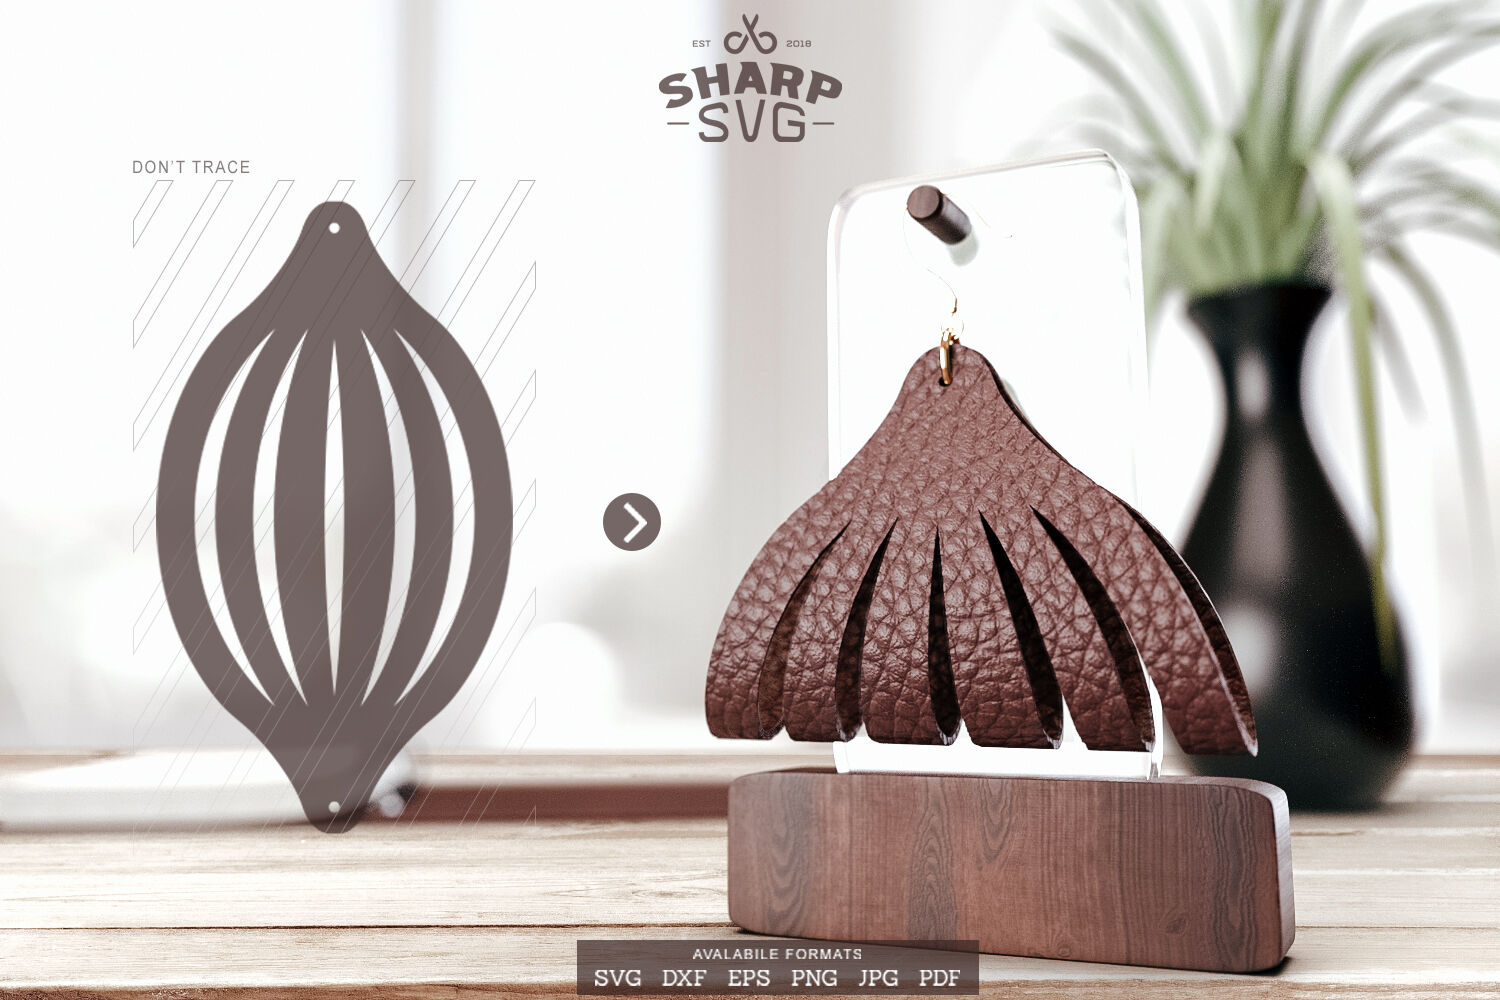 Folded Earring SVG Leather Twisted Earrings Cut Template By SharpSVG